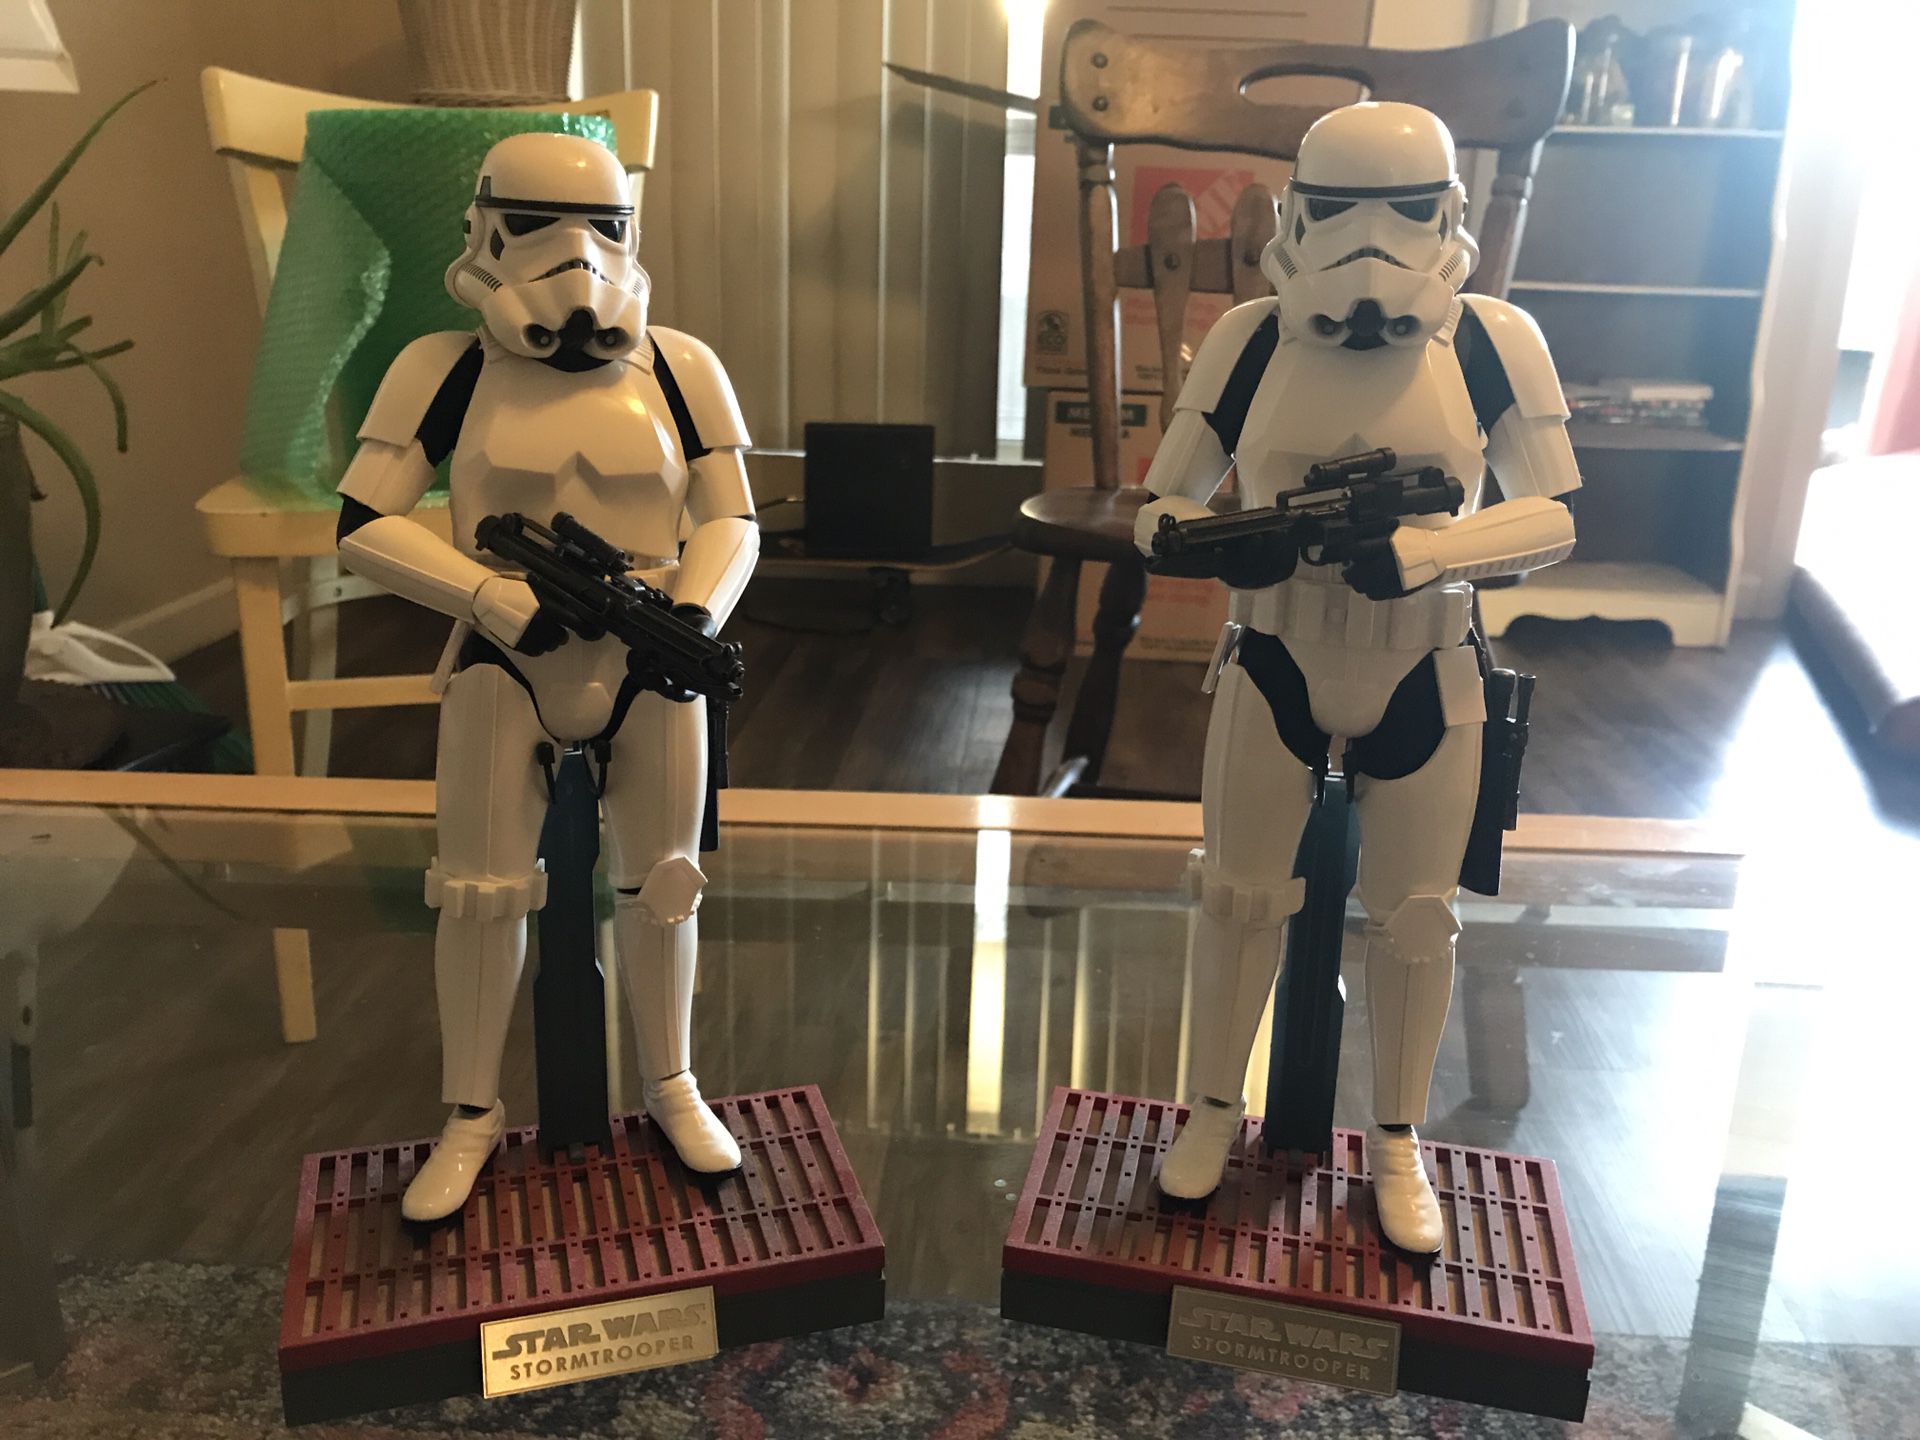 Star Wars hot toys storm troopers 2 pack